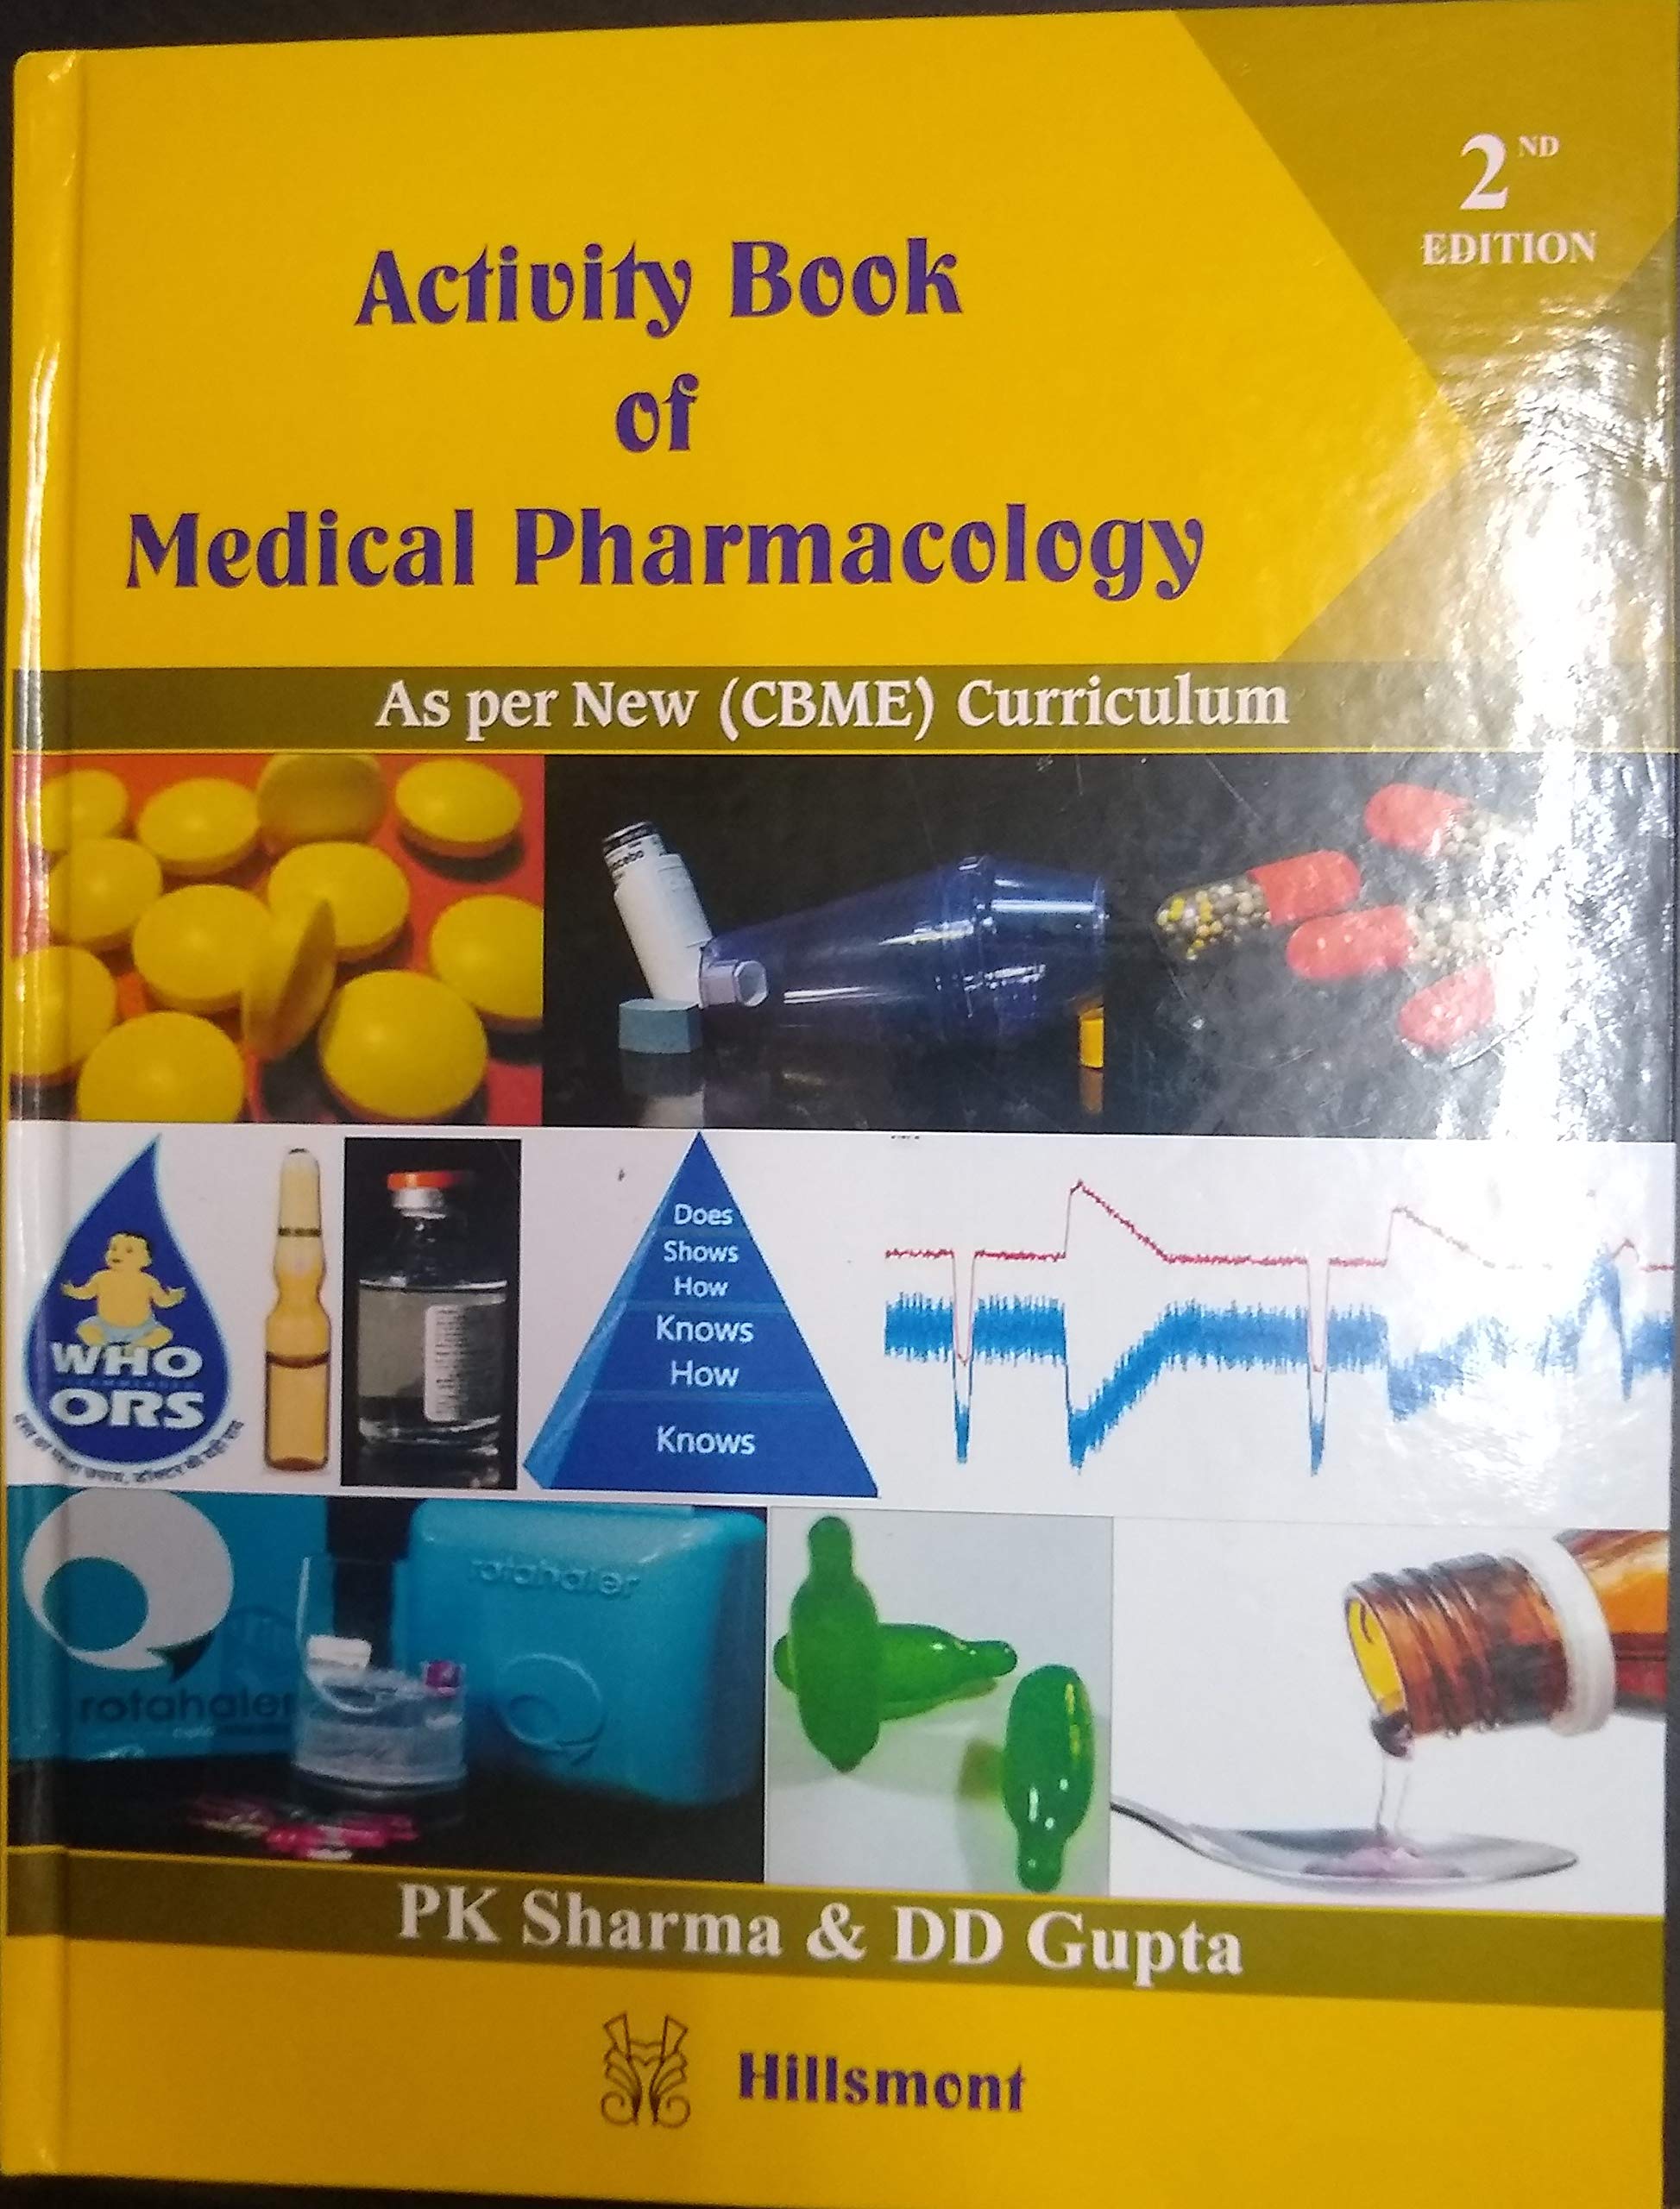 Activity Book Of Medical Pharmacology 2ed(As per new CBME curriculum)